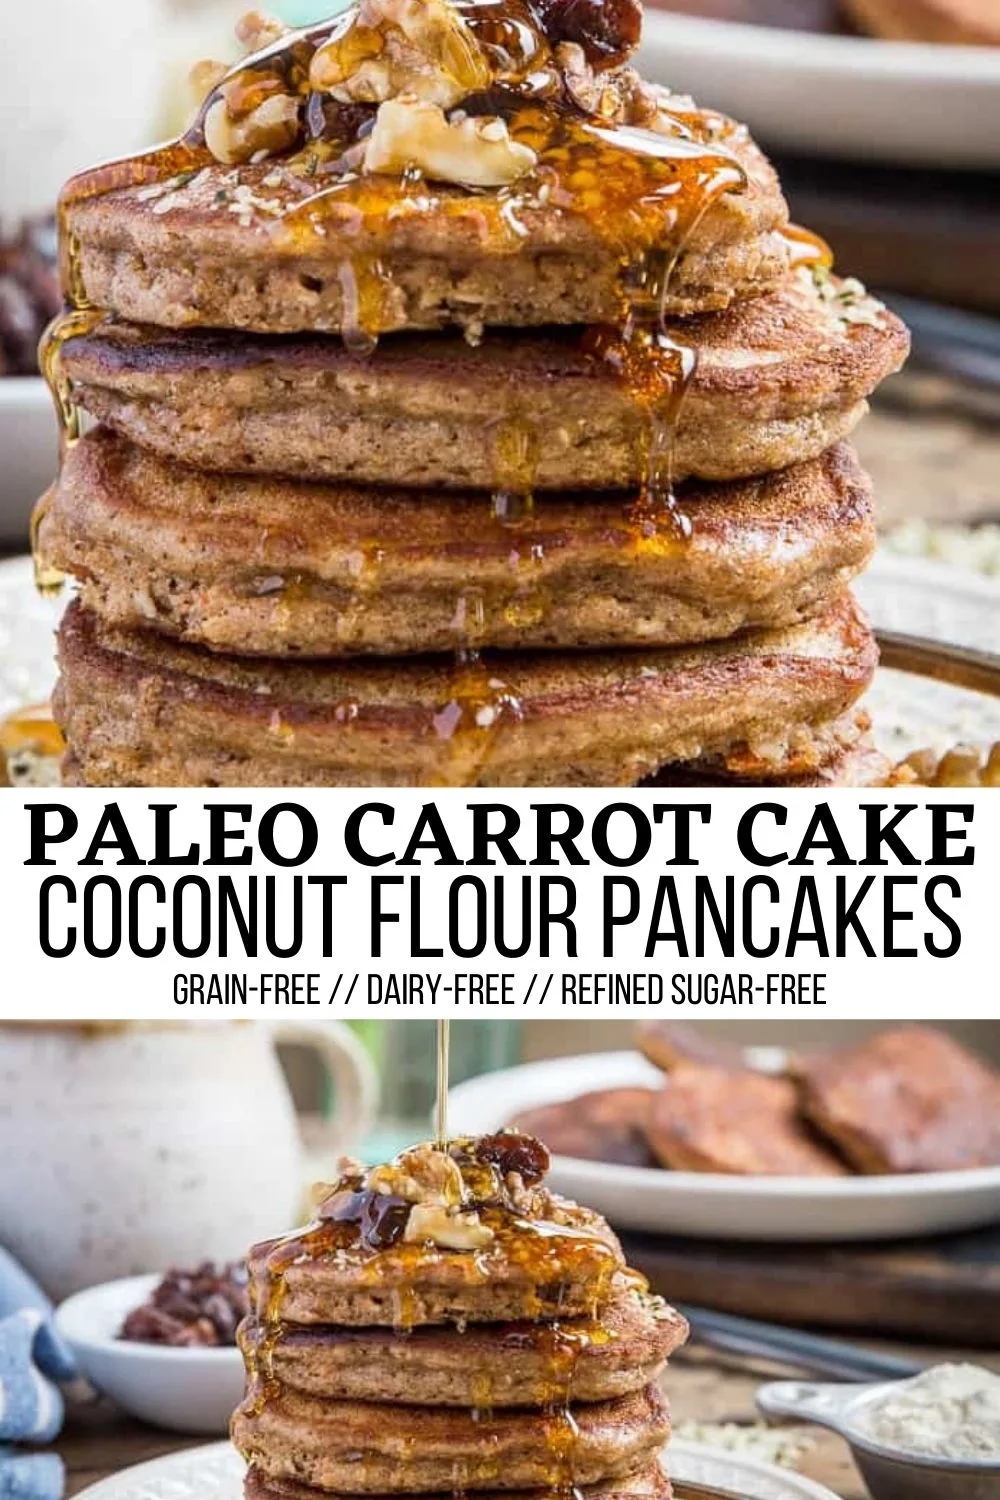 Paleo Carrot Cake Pancakes - grain-free, refined sugar-free, dairy-free, gluten-free pancakes made with coconut flour for a healthy breakfast.